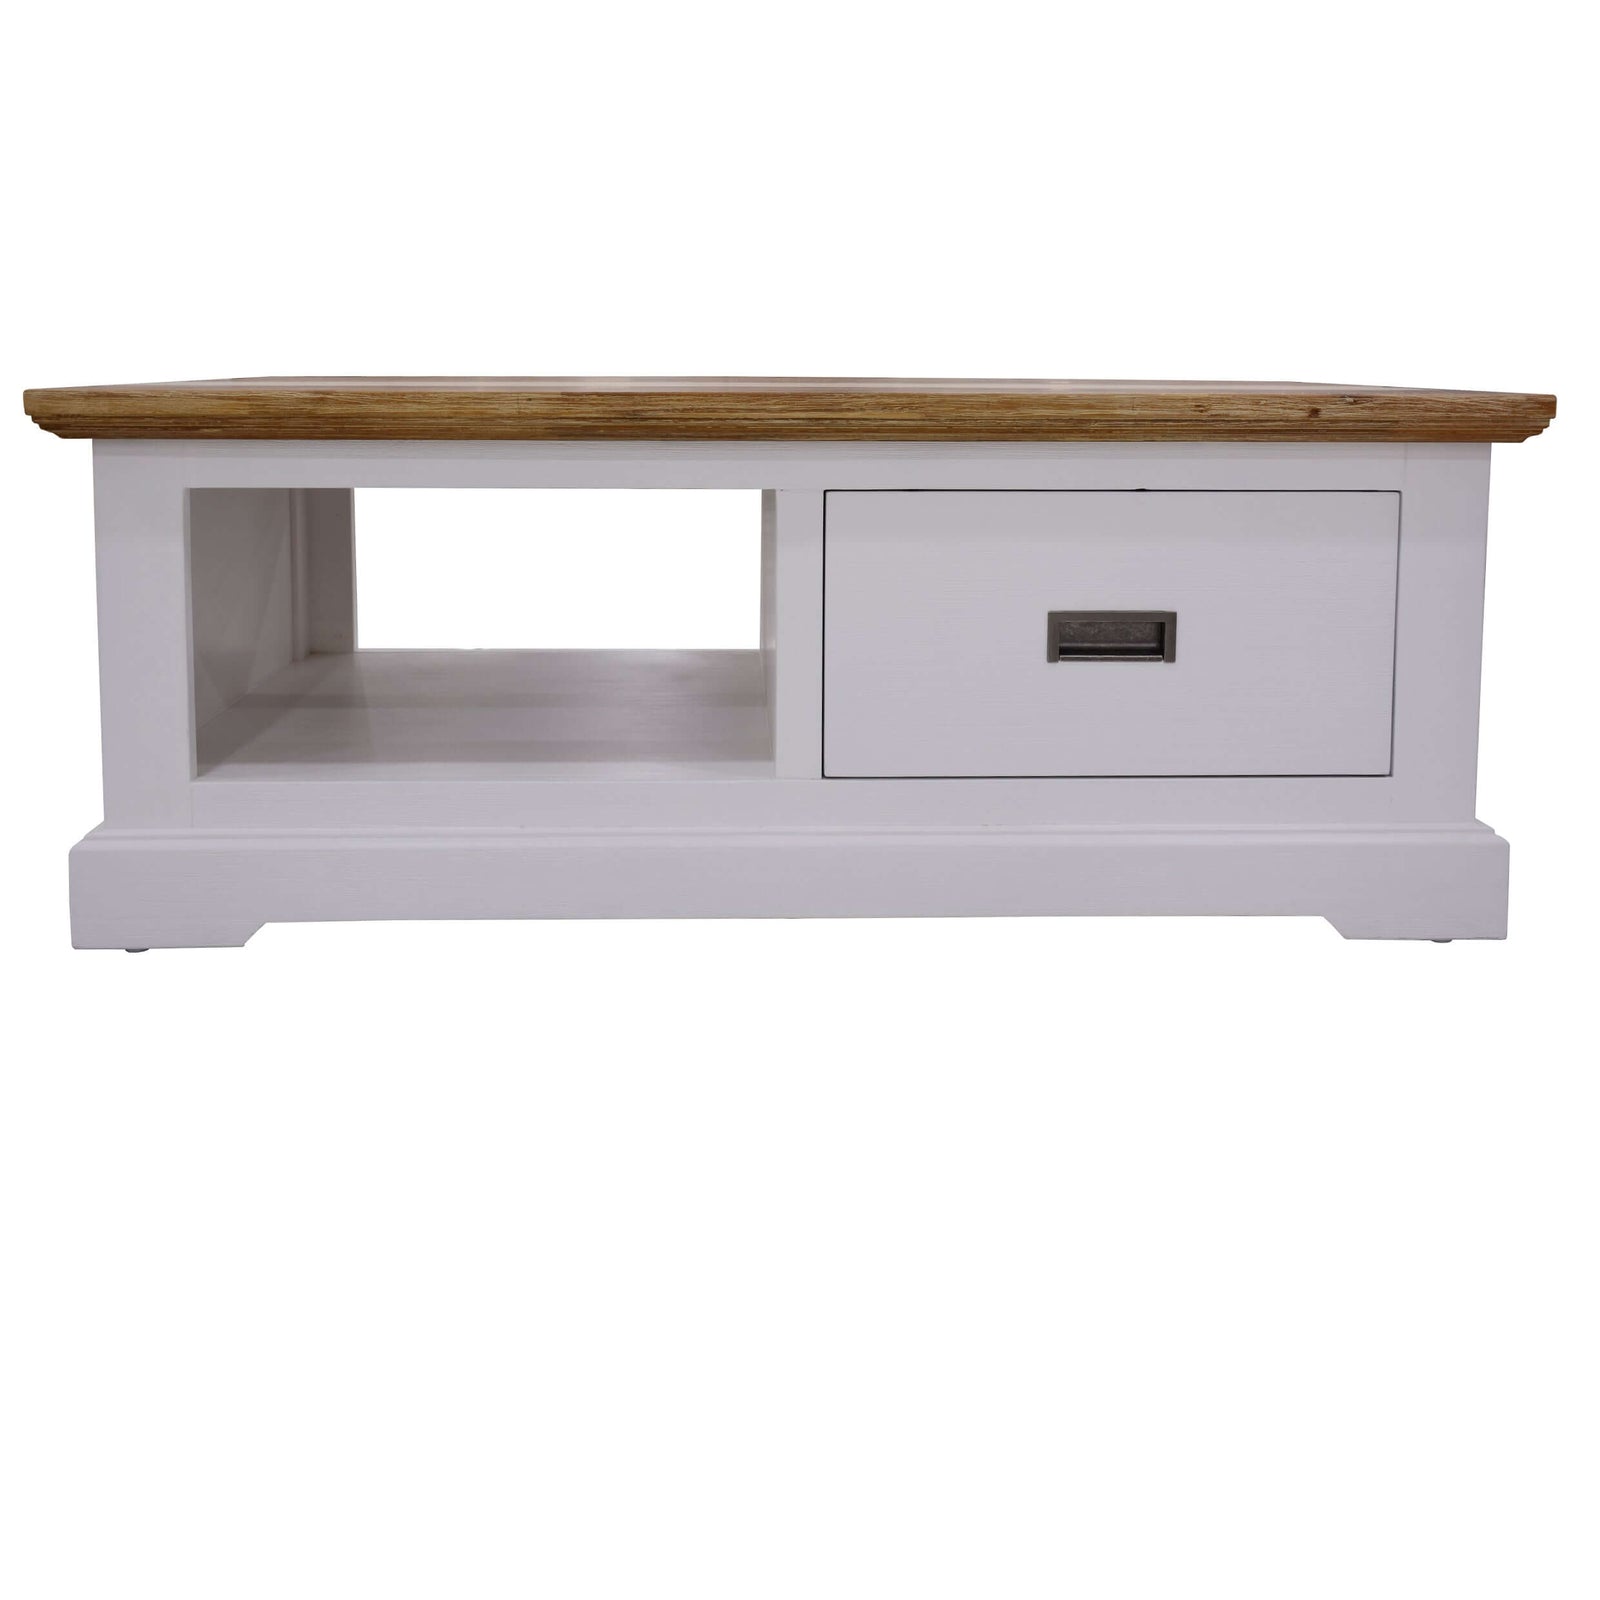 Buy Orville Coffee Table 120cm 1 Drawer Solid Acacia Timber Wood - Upinteriors-Upinteriors